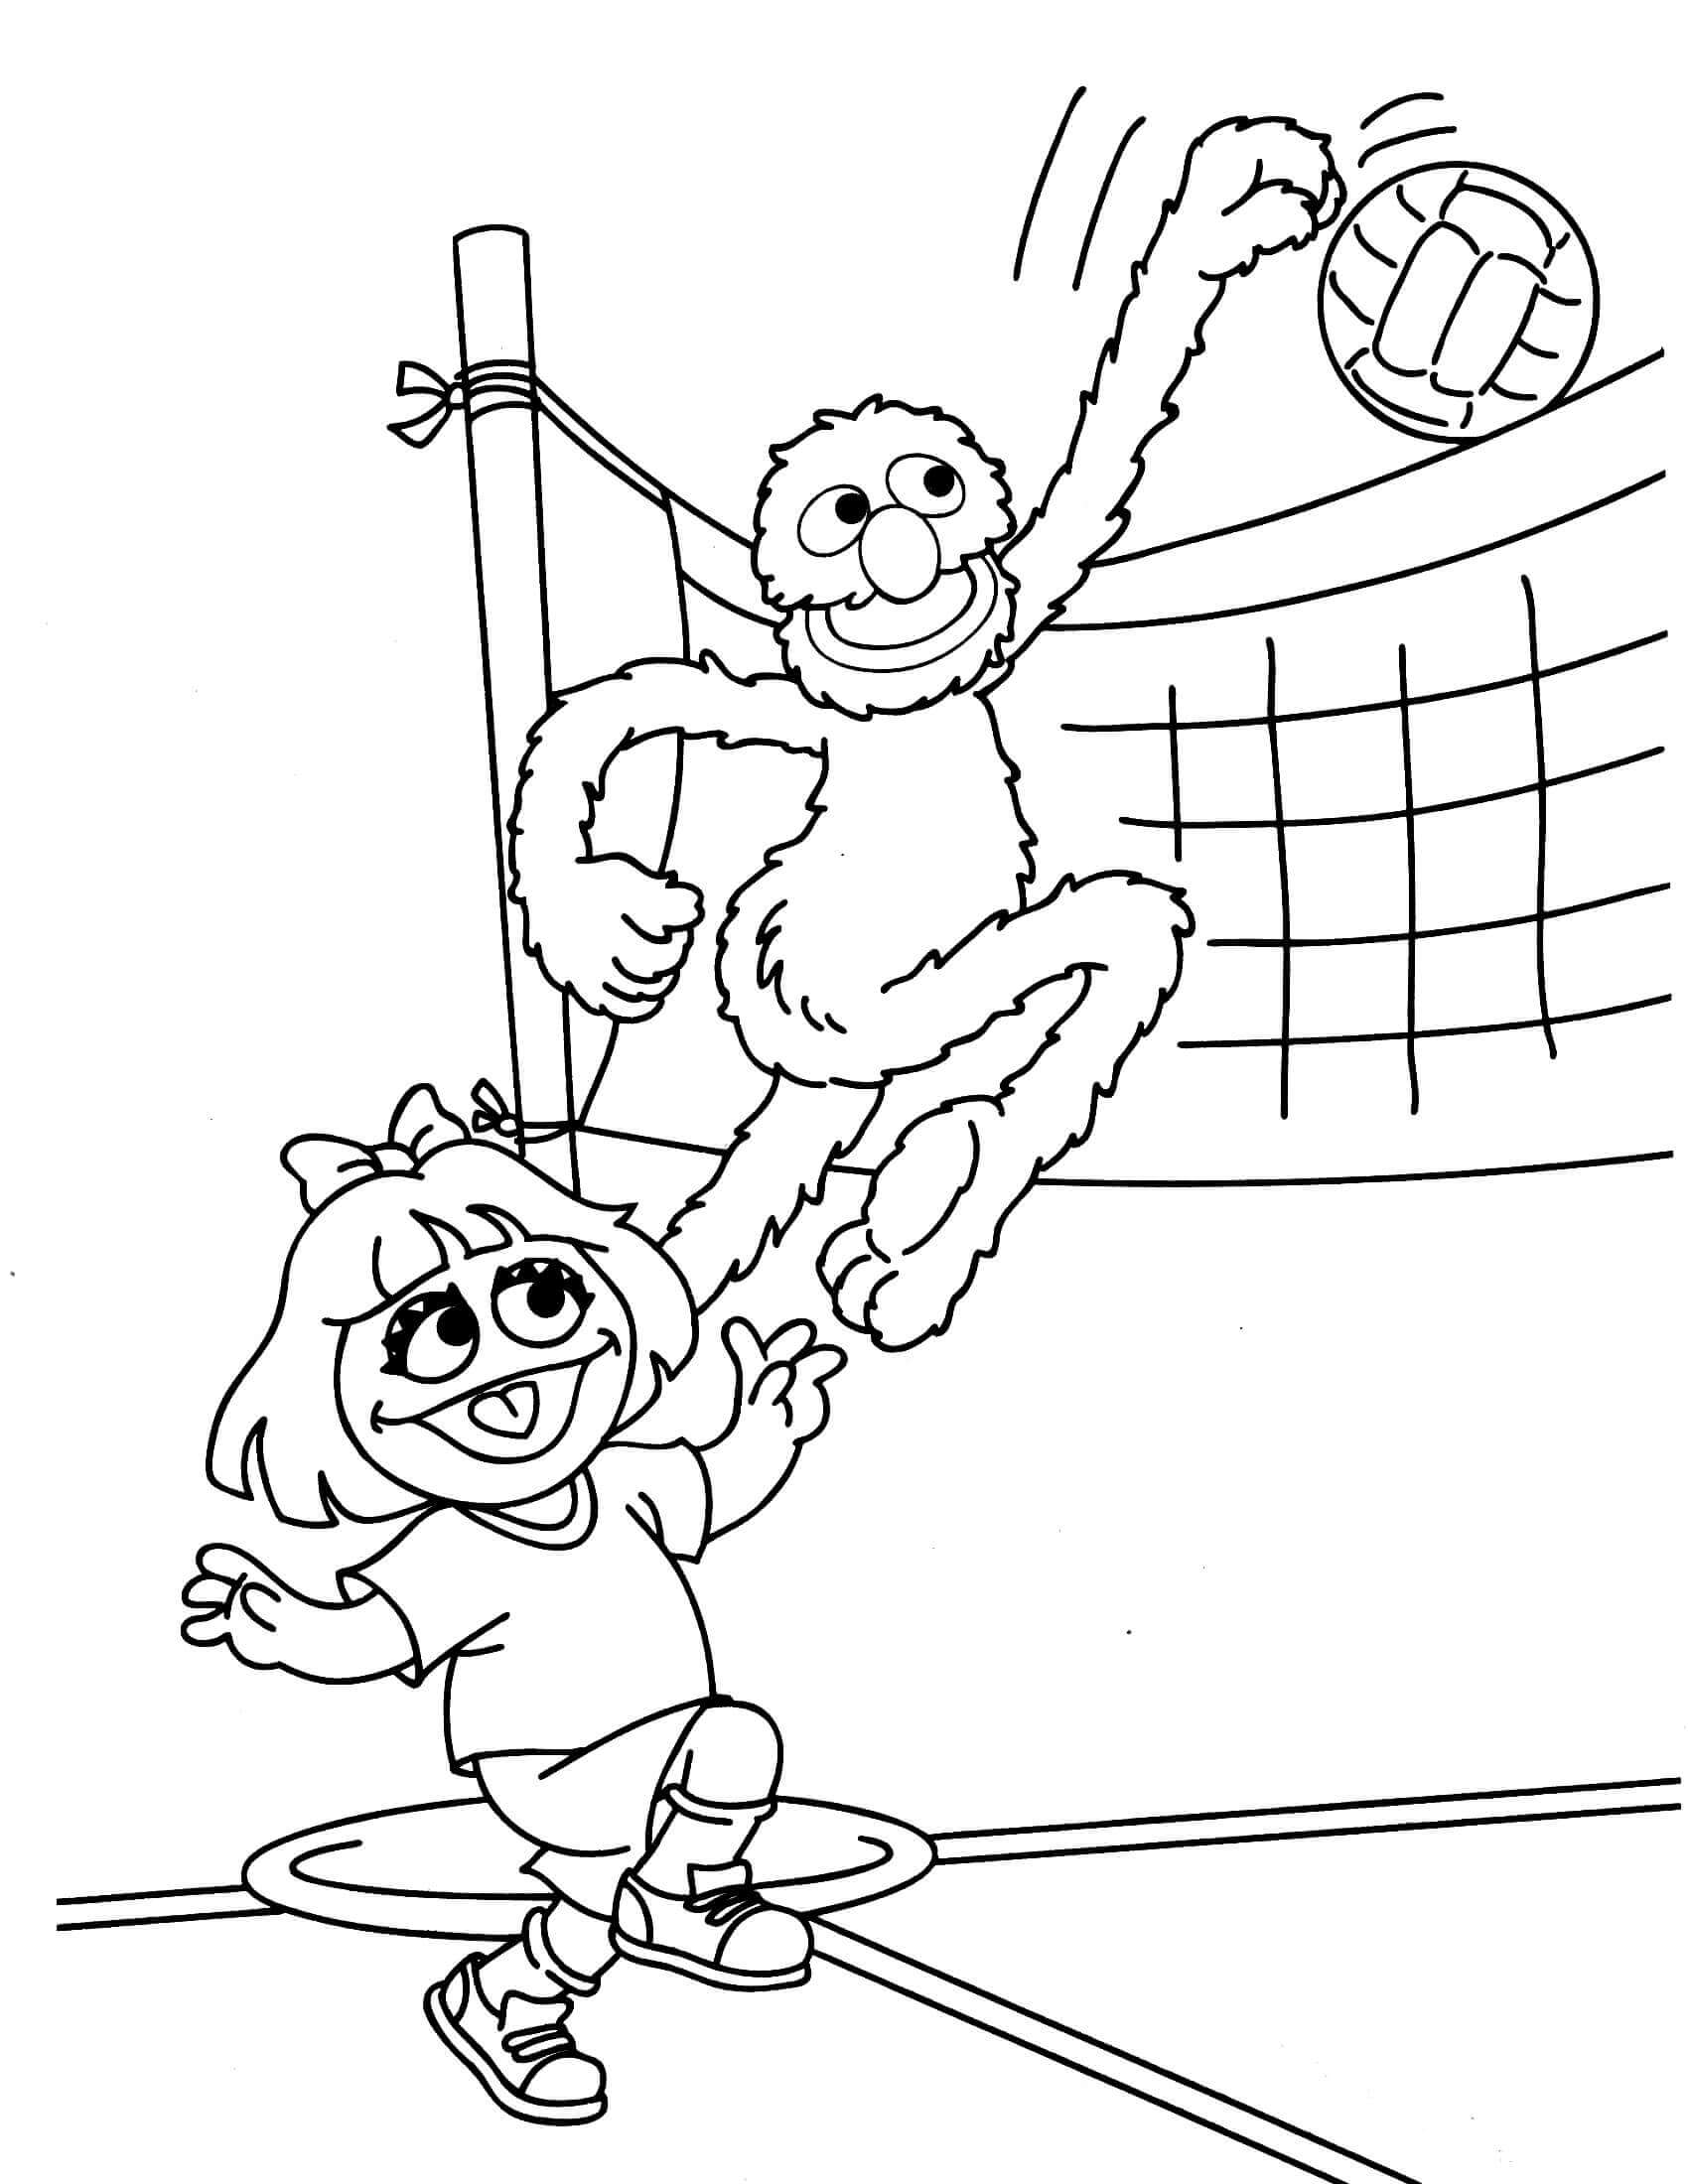 Volleyball Sesame Street Coloring Pages